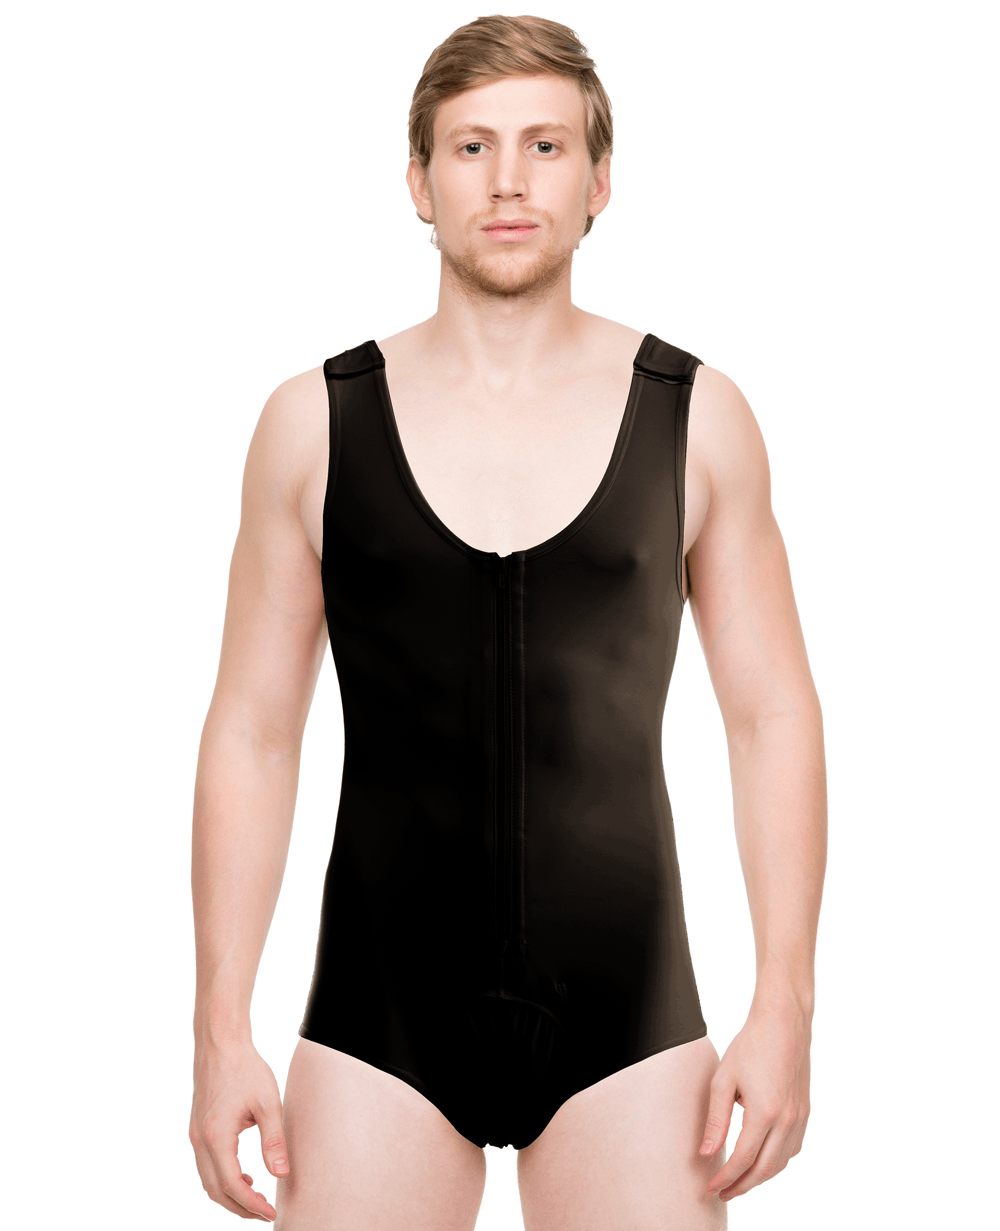 Isavela Stage 1 Compression Body Suit with Bra - Brief